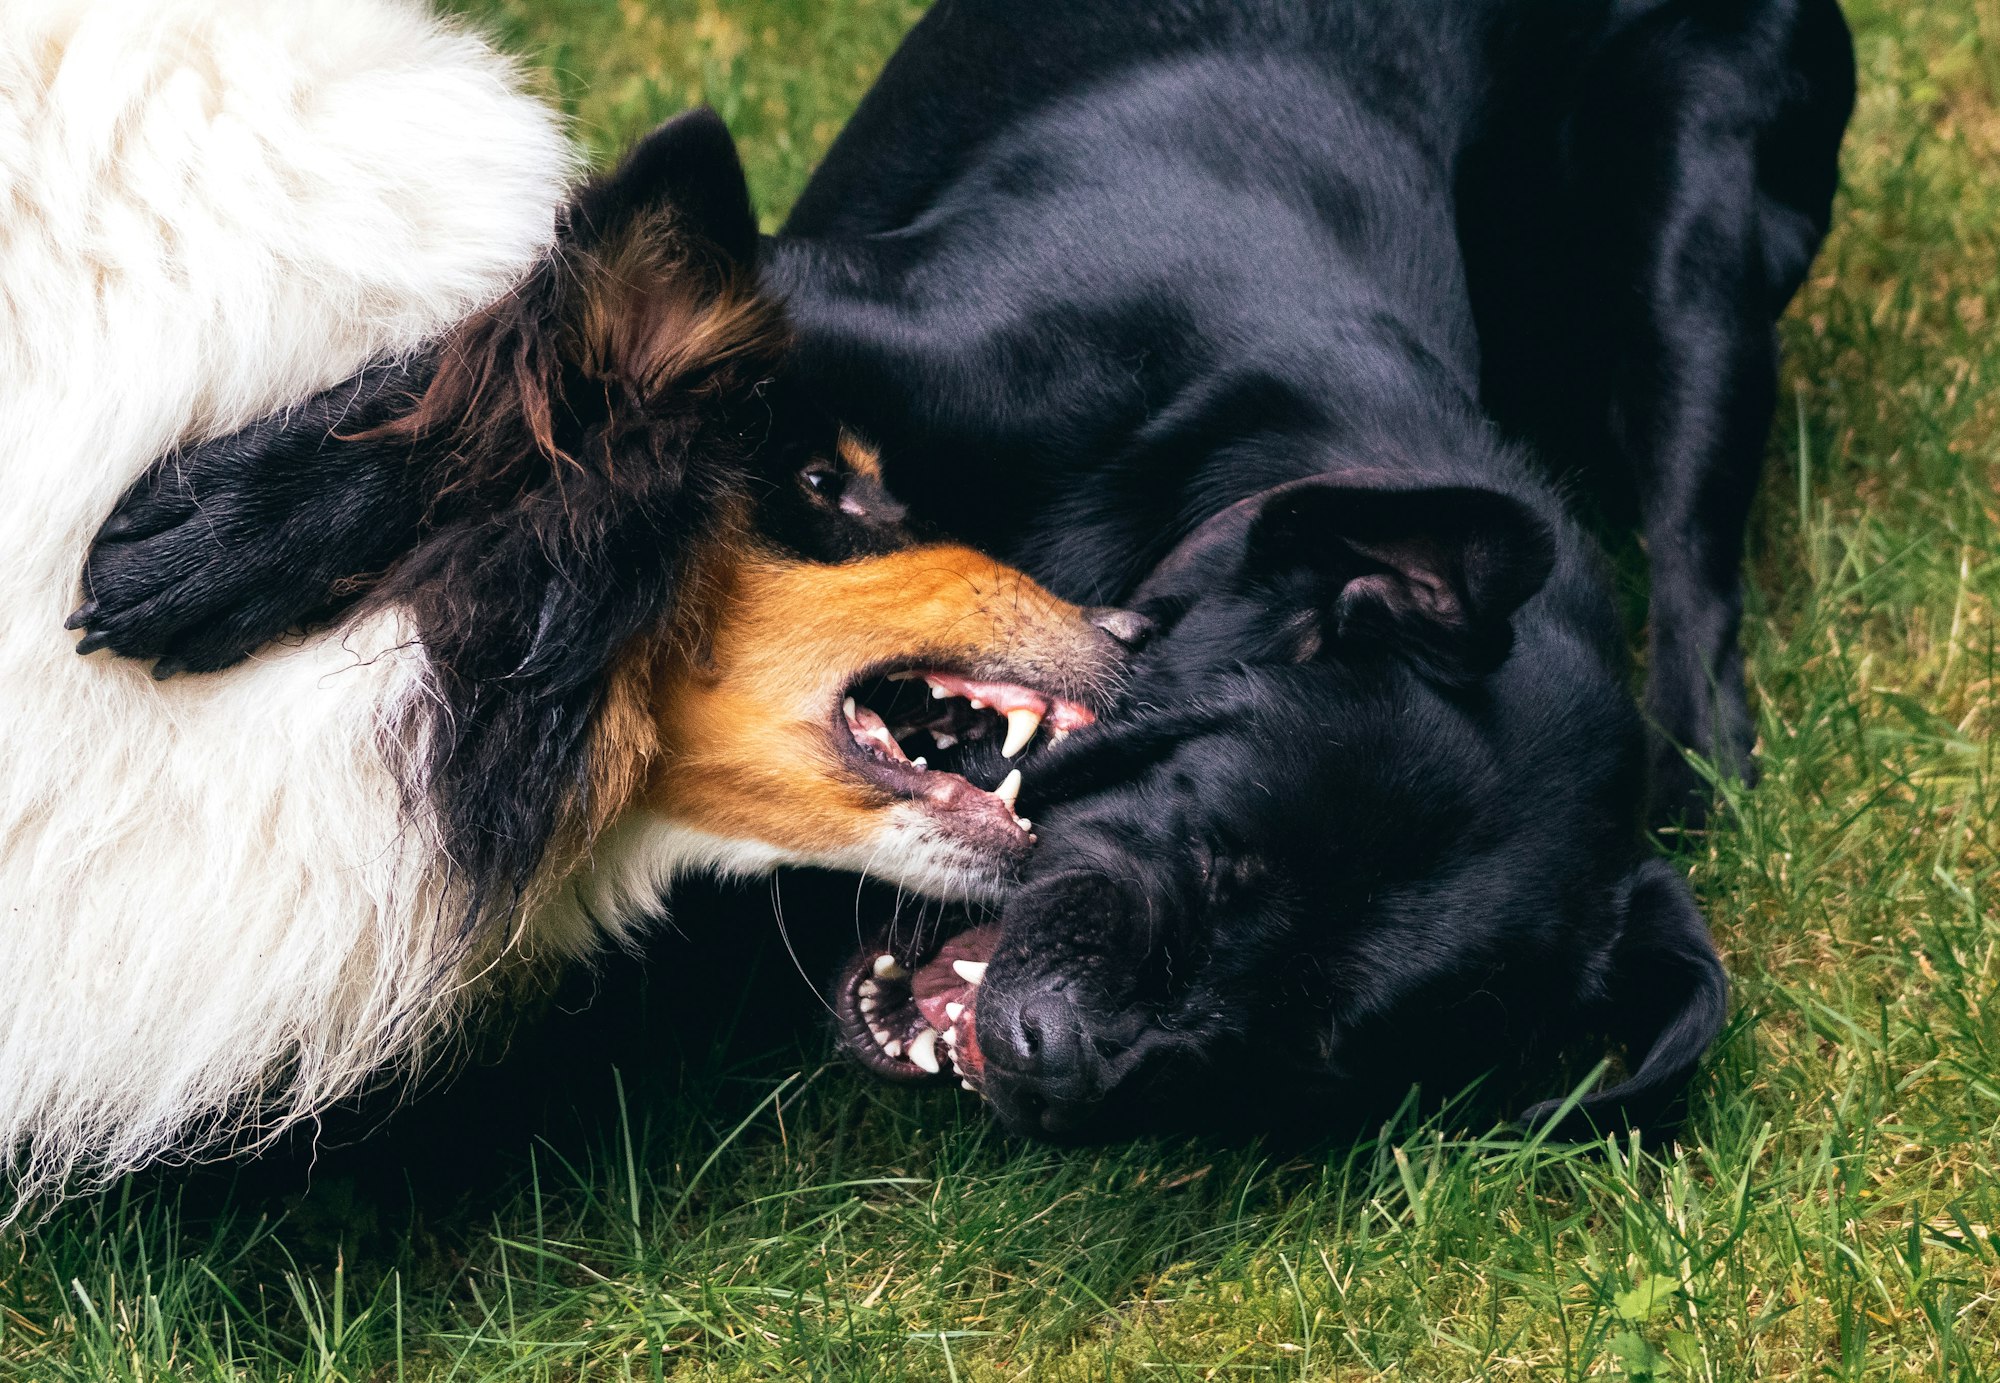 Dog Fights and what to do when it happens